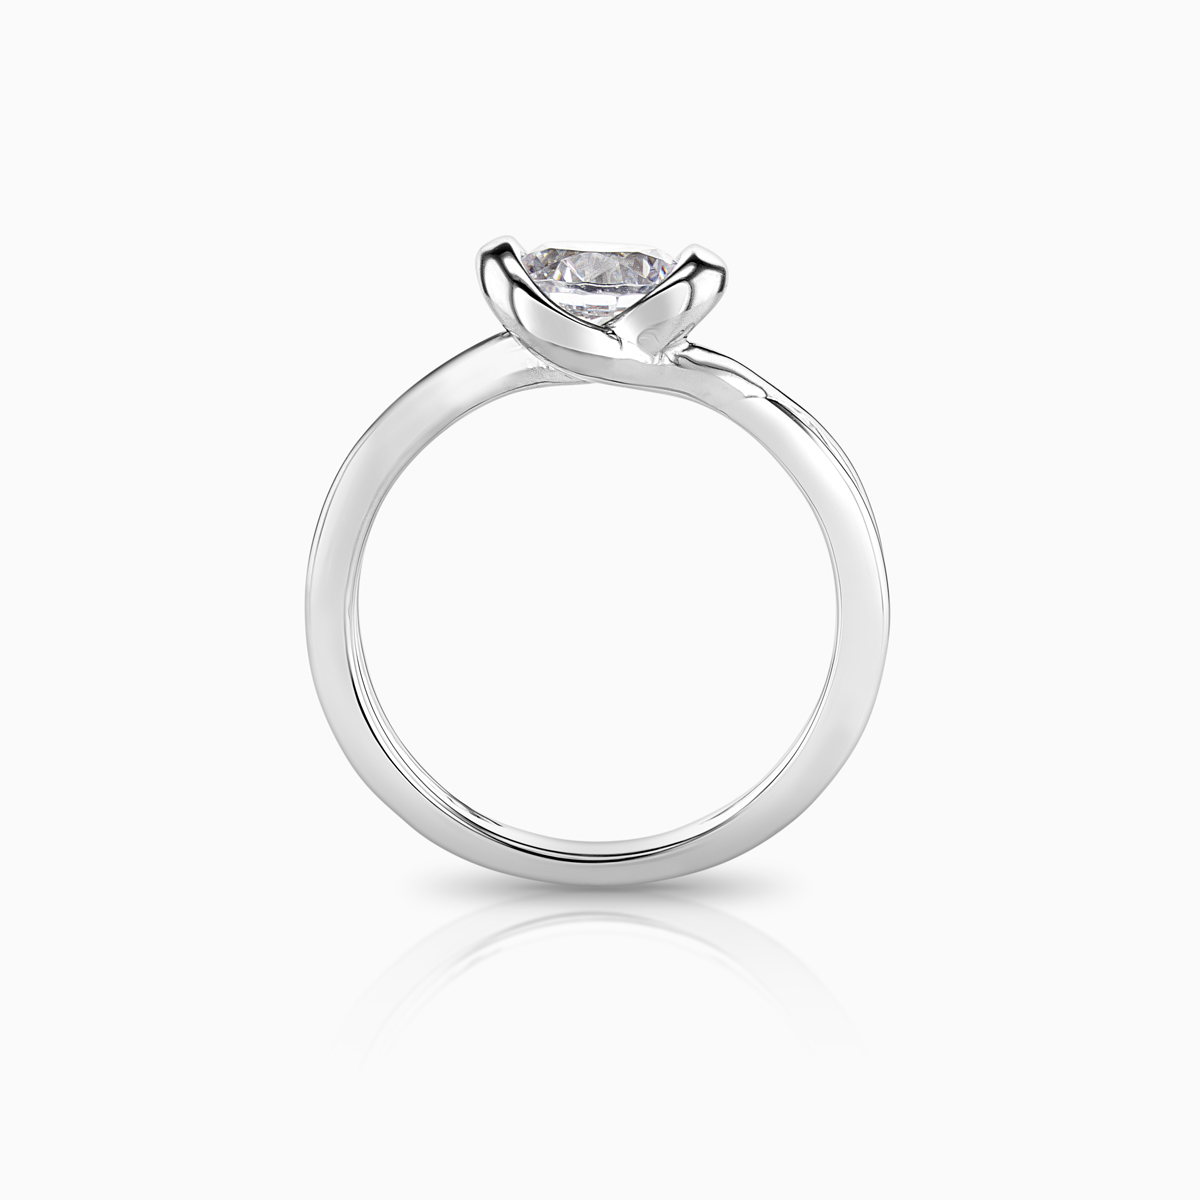 Dino Lonzano Knot Style Solitaire Engagement Ring, 18k White Gold